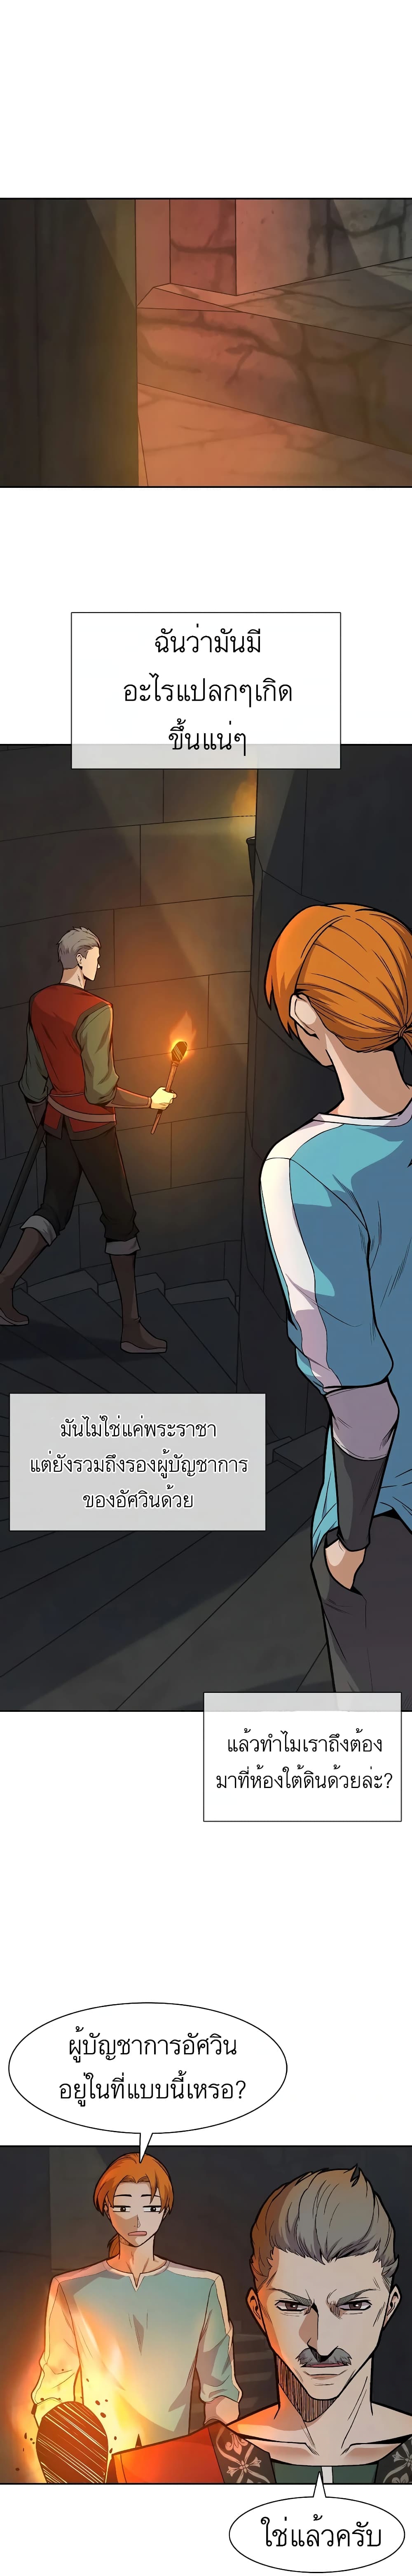 Raising Newbie Heroes In Another World ตอนที่ 7 (28)